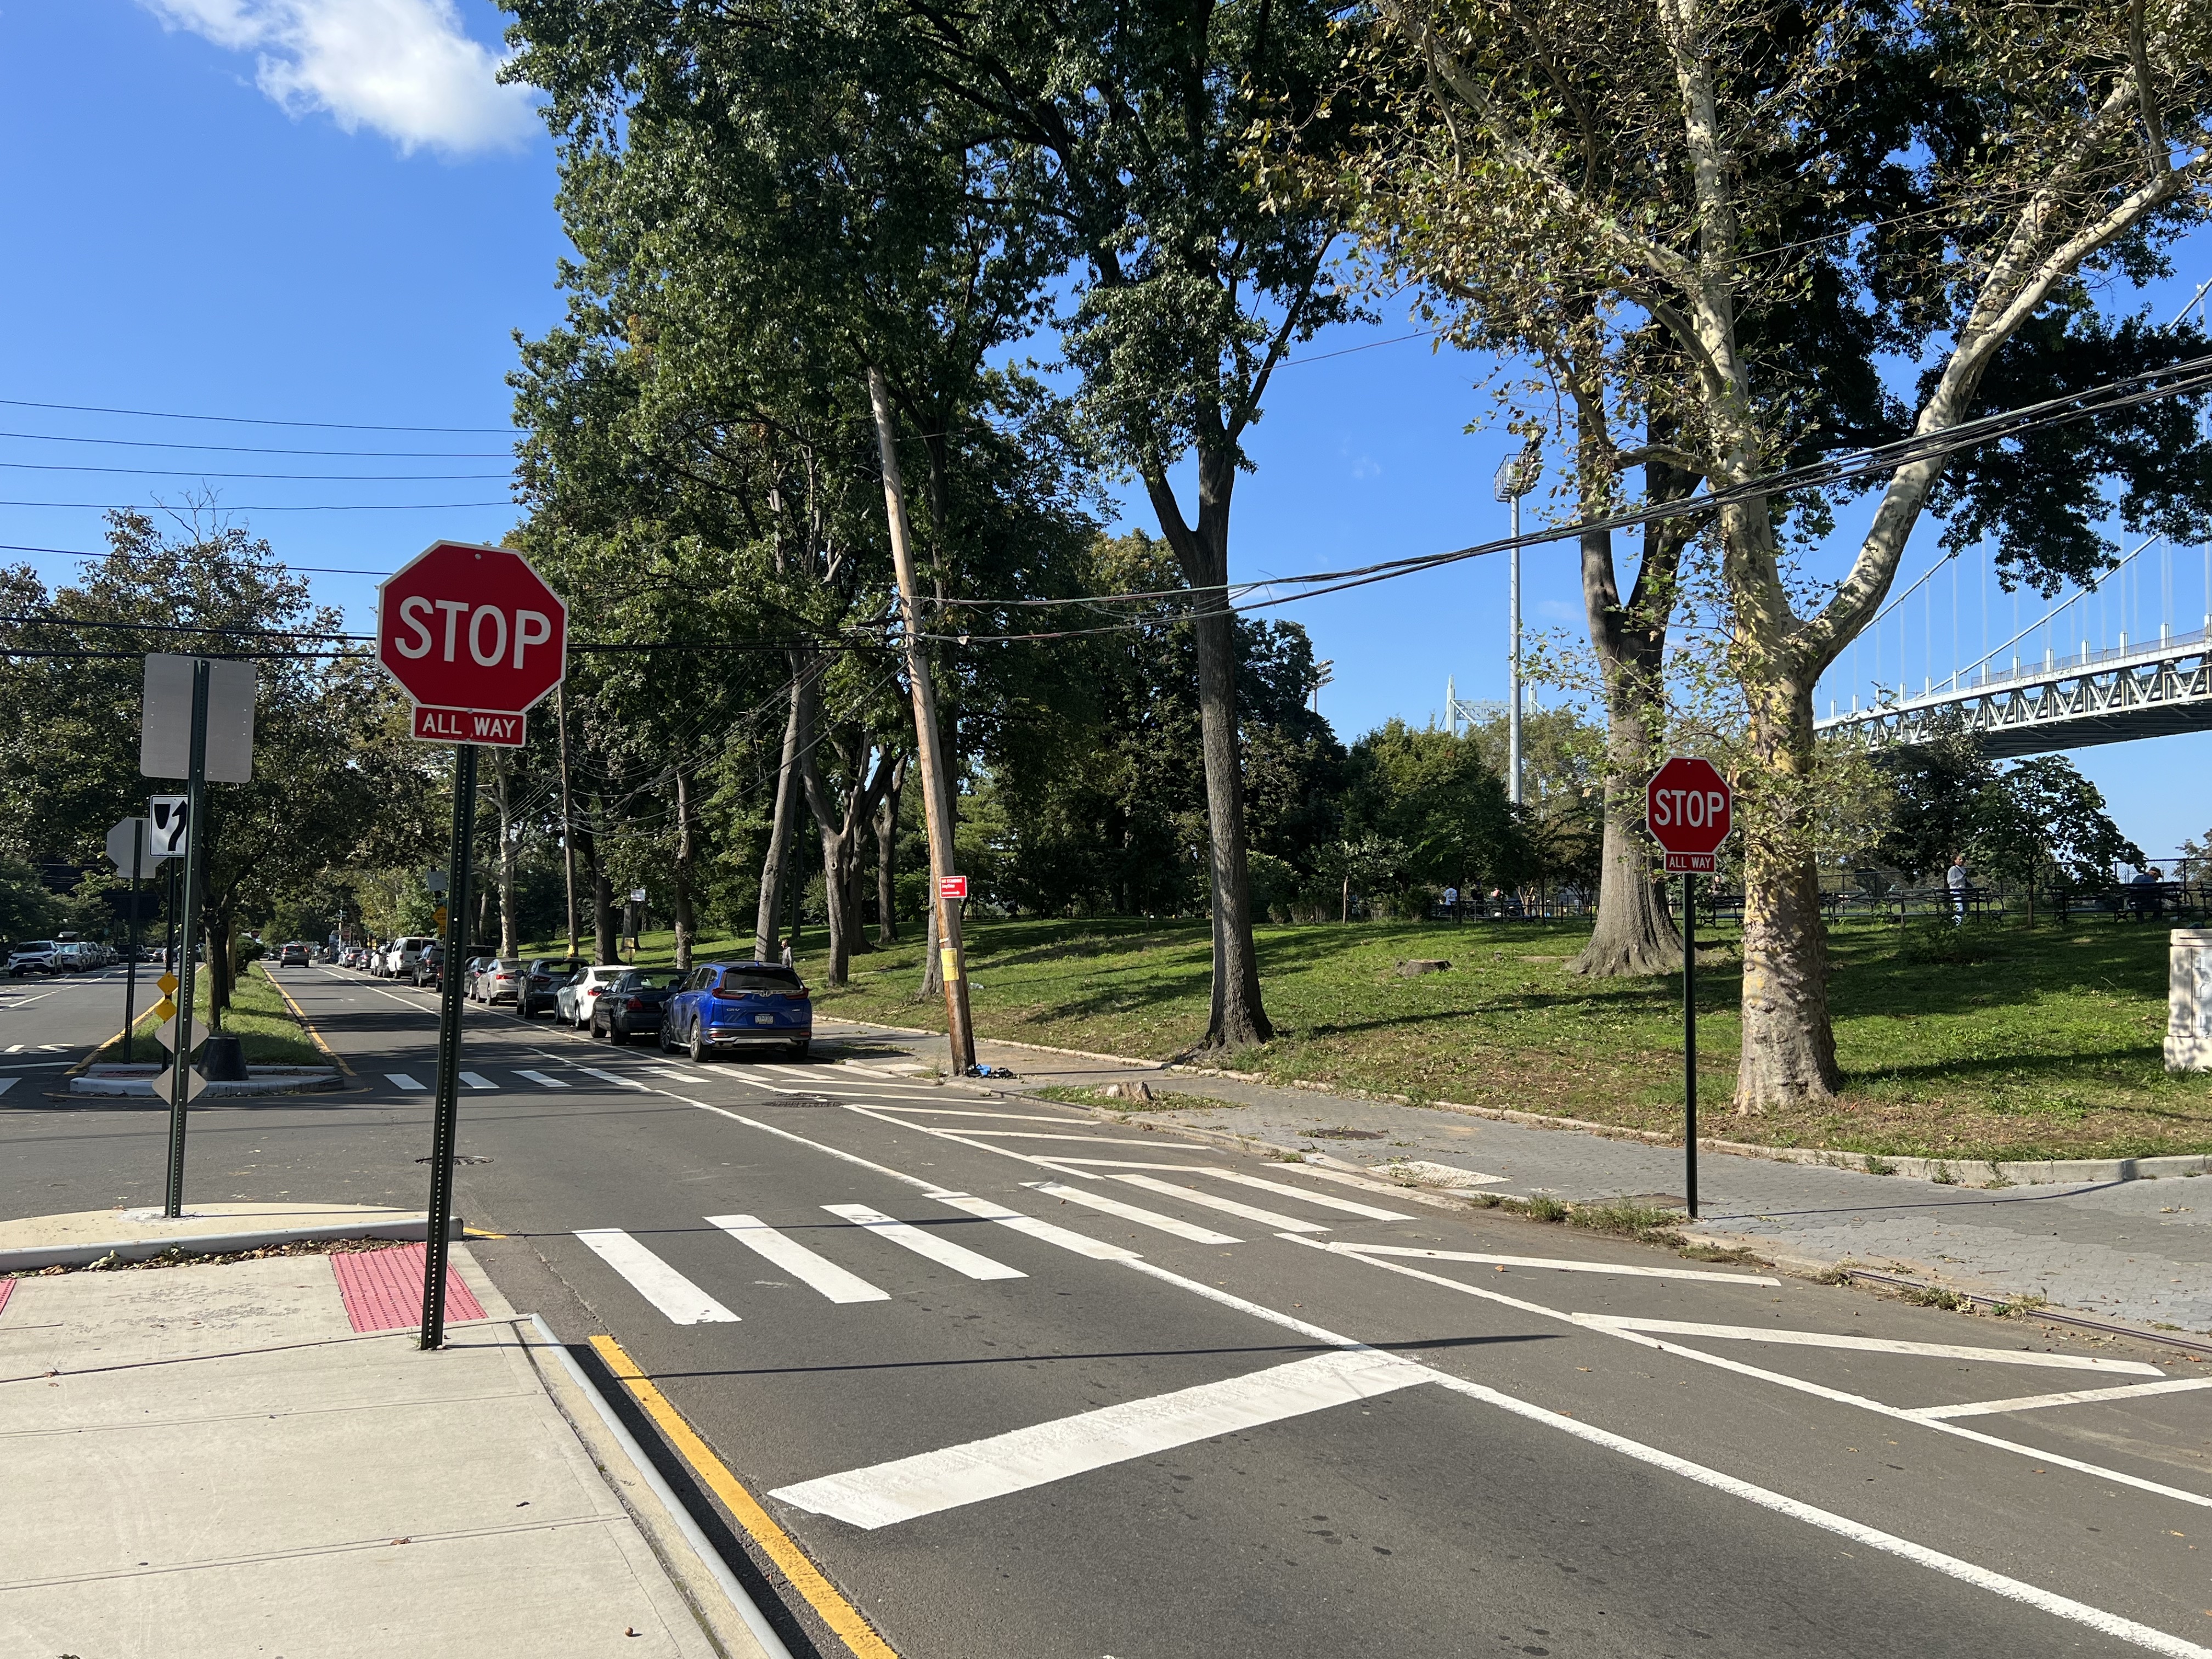 All-Way Stop Signs Are Up At 18th St and Astoria Park South